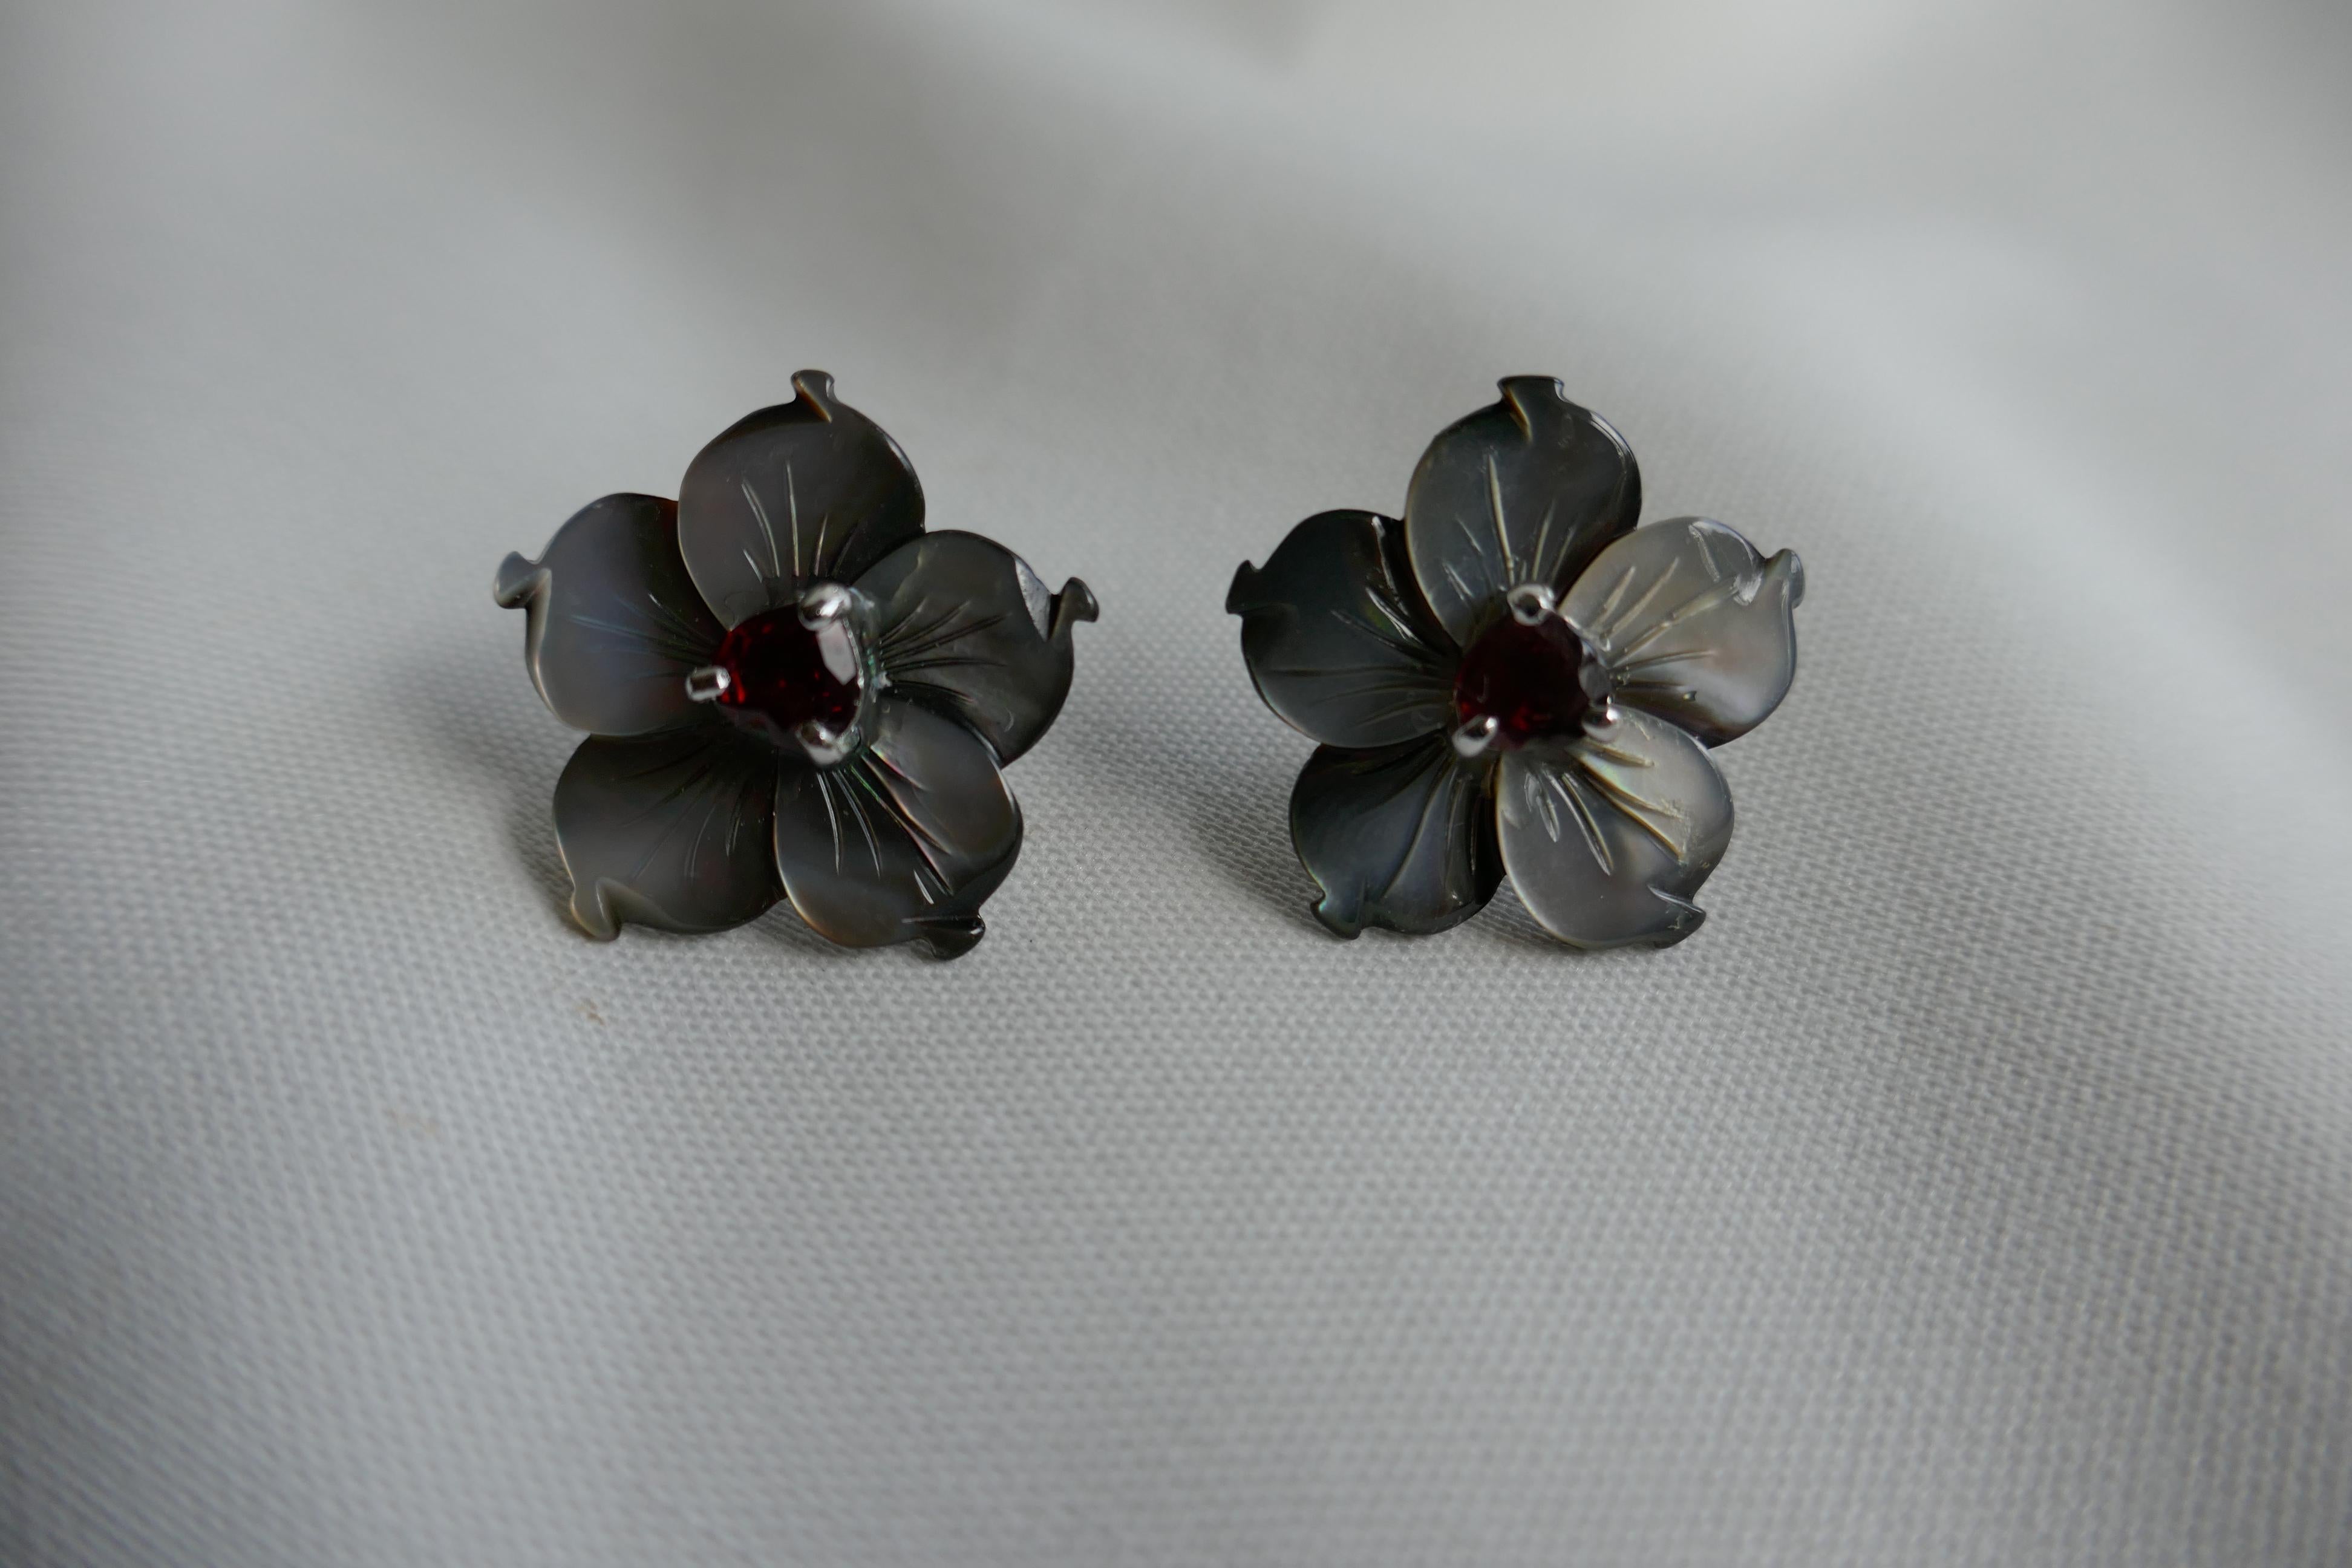 These earrings are easy to wear. The come in various combinations of Black lip Mother of Pearl flowers and center stones or pearls. The Black lip mother-of-pearl in this earring is combined with an amethyst stone center.  The flower is 1 inch in